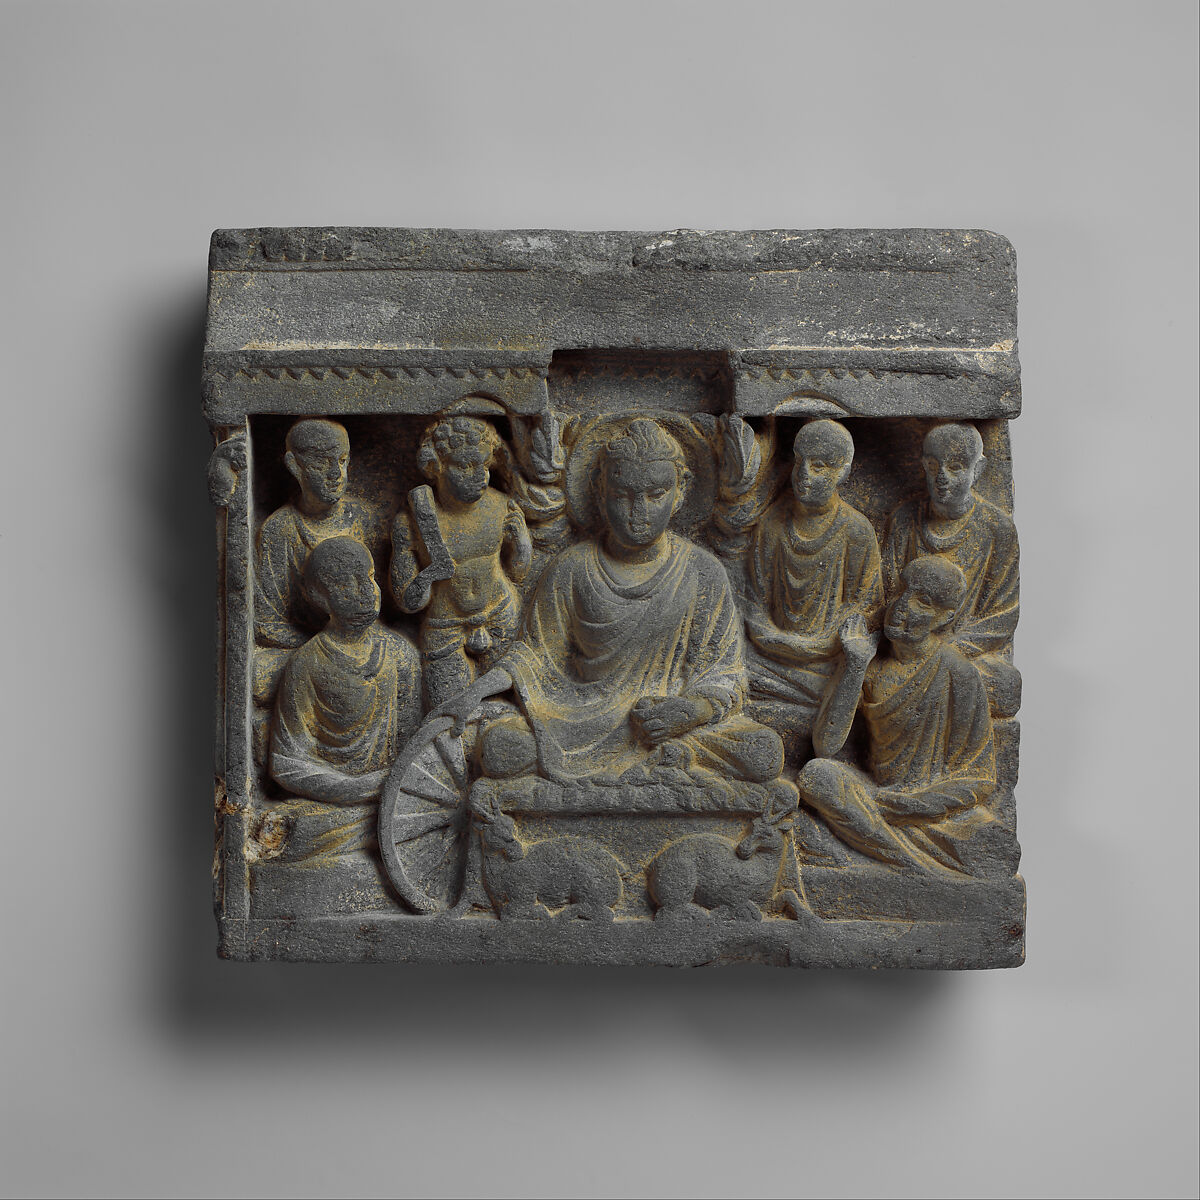 Vajrapani Attends the Buddha at His First Sermon